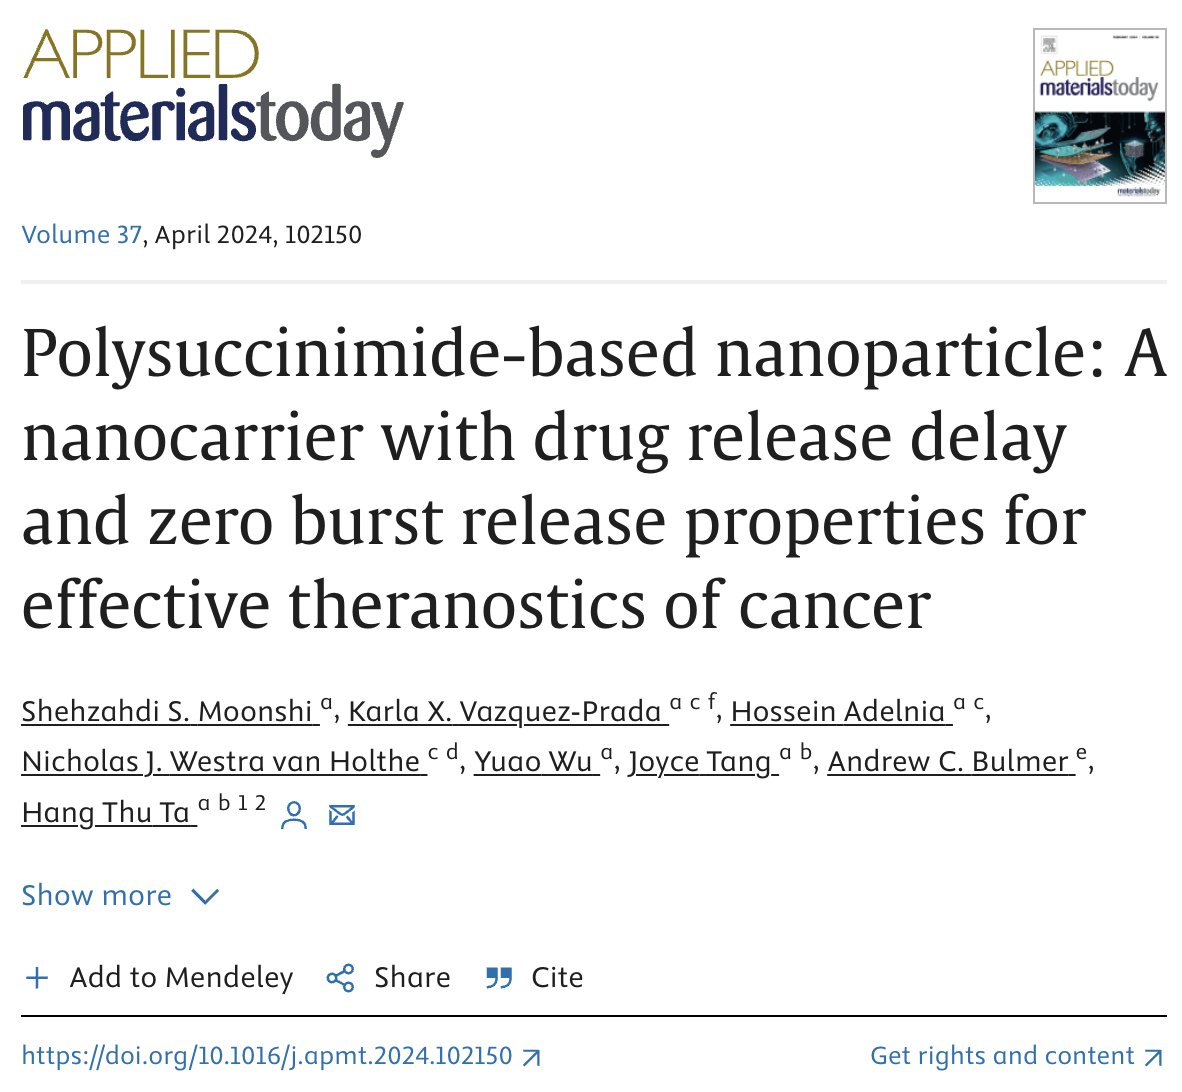 #NewPaper supported by NIF @UQ_CAI: Polysuccinimide-based nanoparticle: A nanocarrier with drug release delay and zero burst release properties for effective theranostics of cancer doi.org/10.1016/j.apmt… @shehzahdimoon @NanoKarlaPrada @AndrewBulmer6 @DrHangTTa @UQ_SCMB